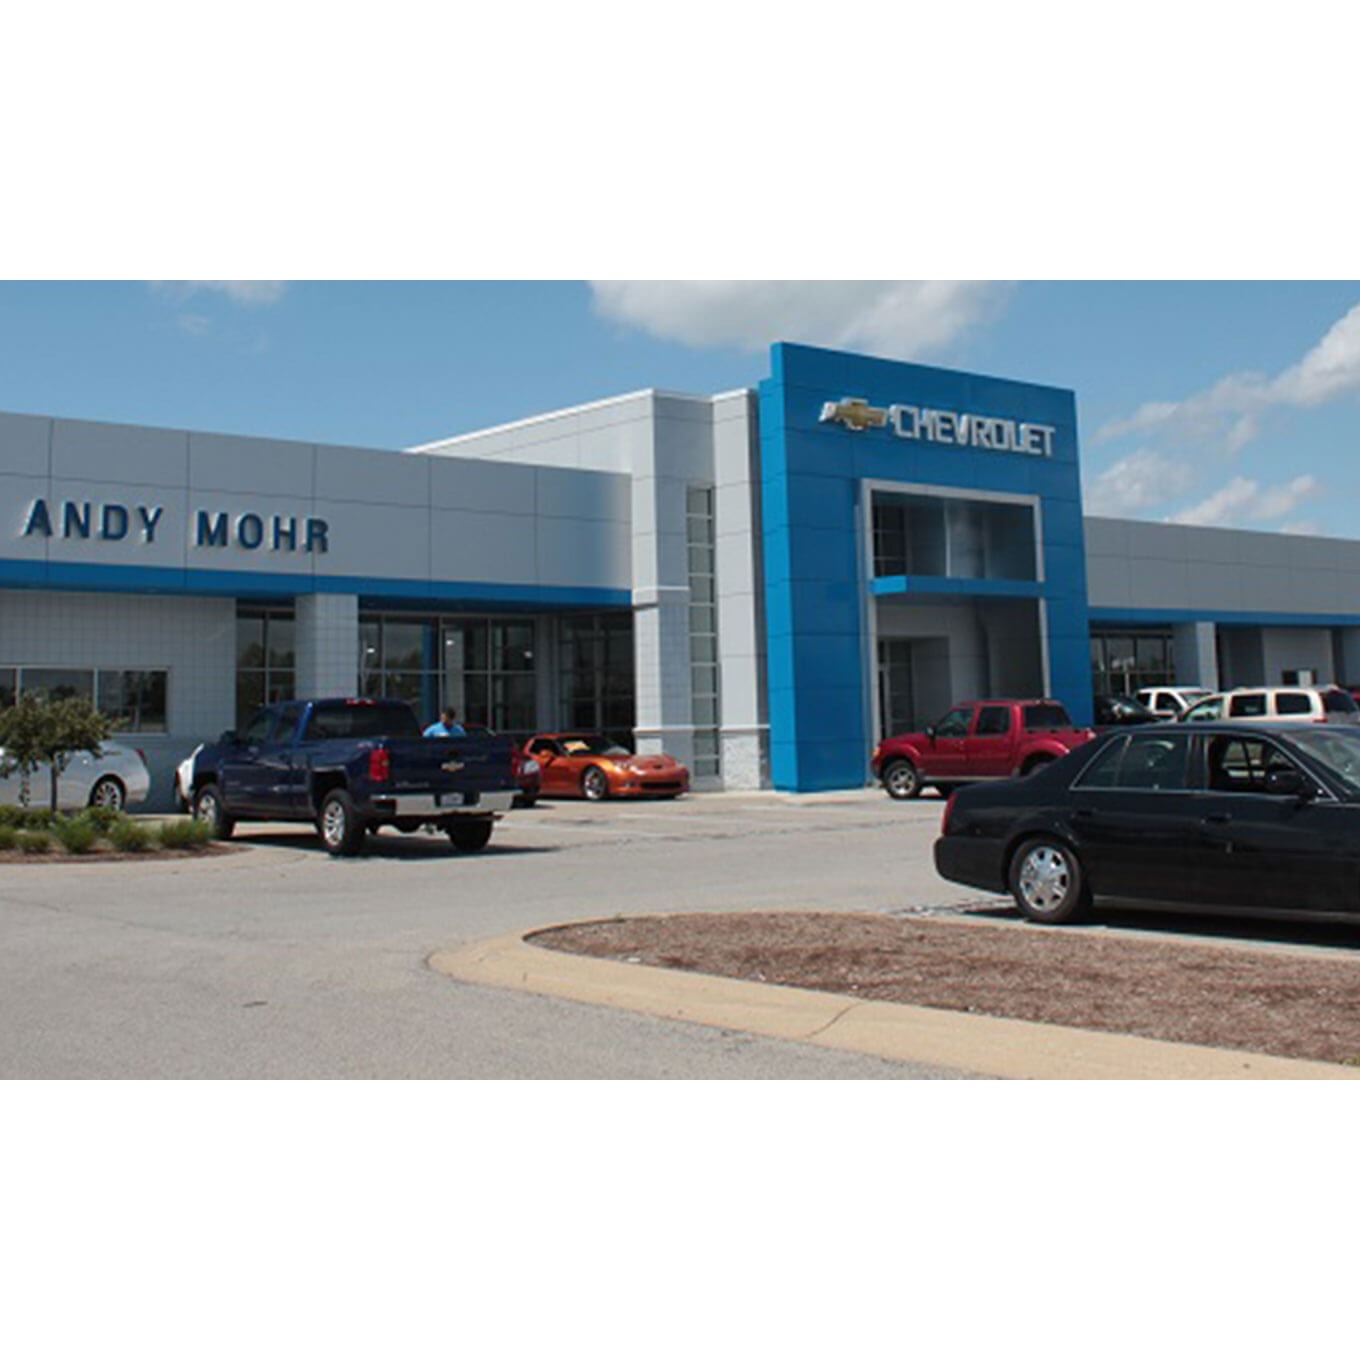 Andy Mohr Chevrolet Coupons near me in Plainfield, IN 46168 | 8coupons